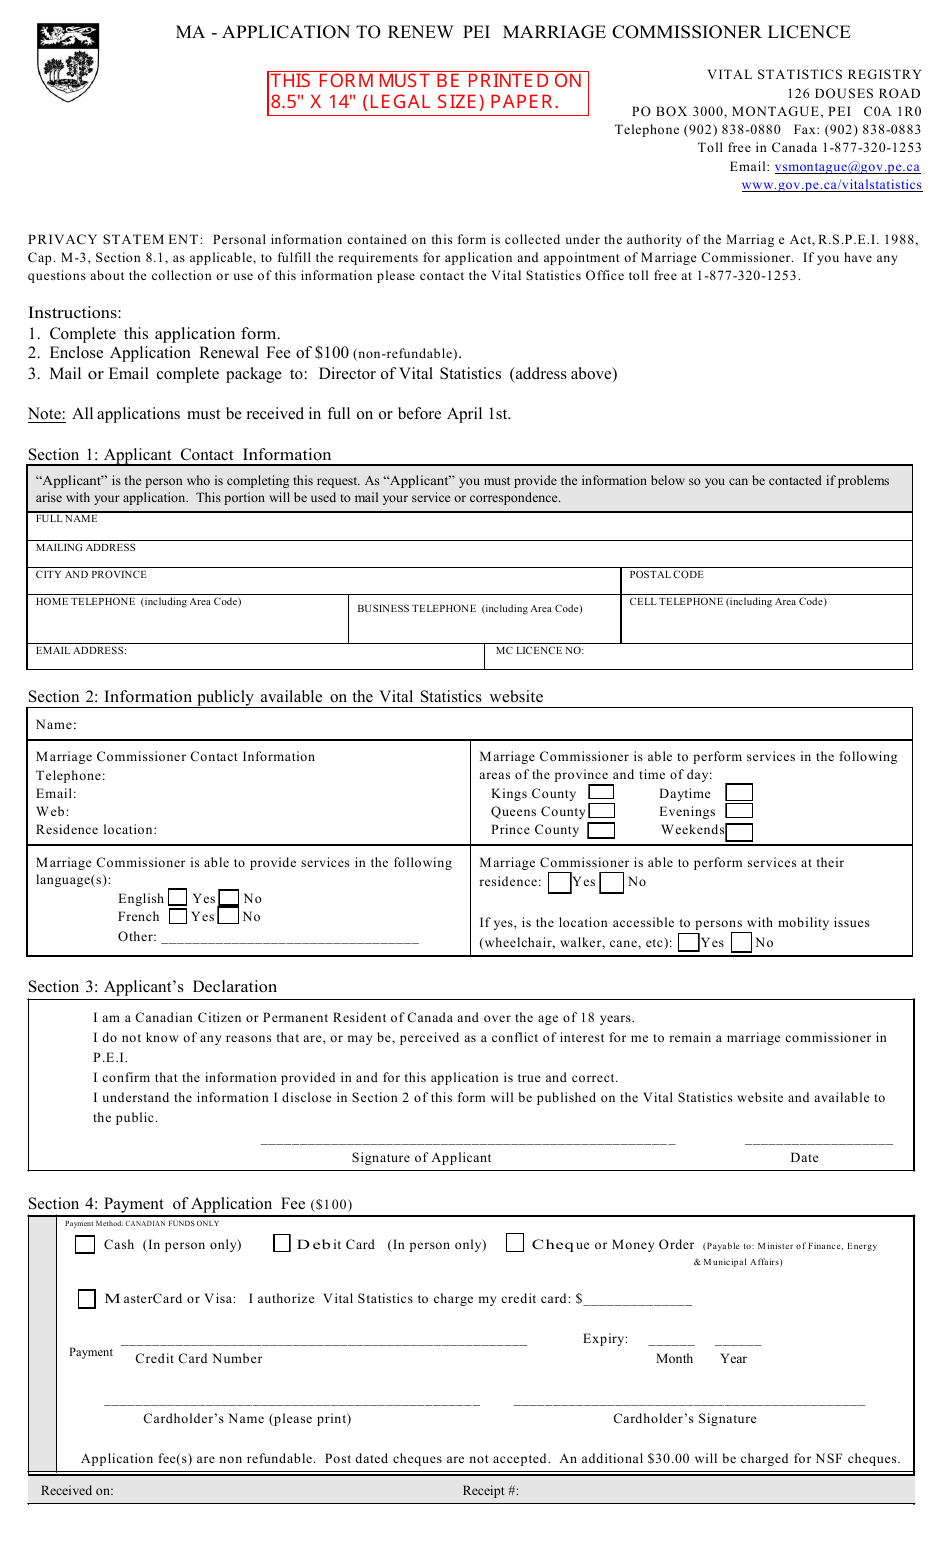 Application to Renew Pei Marriage Commissioner Licence - Prince Edward Island, Canada, Page 1